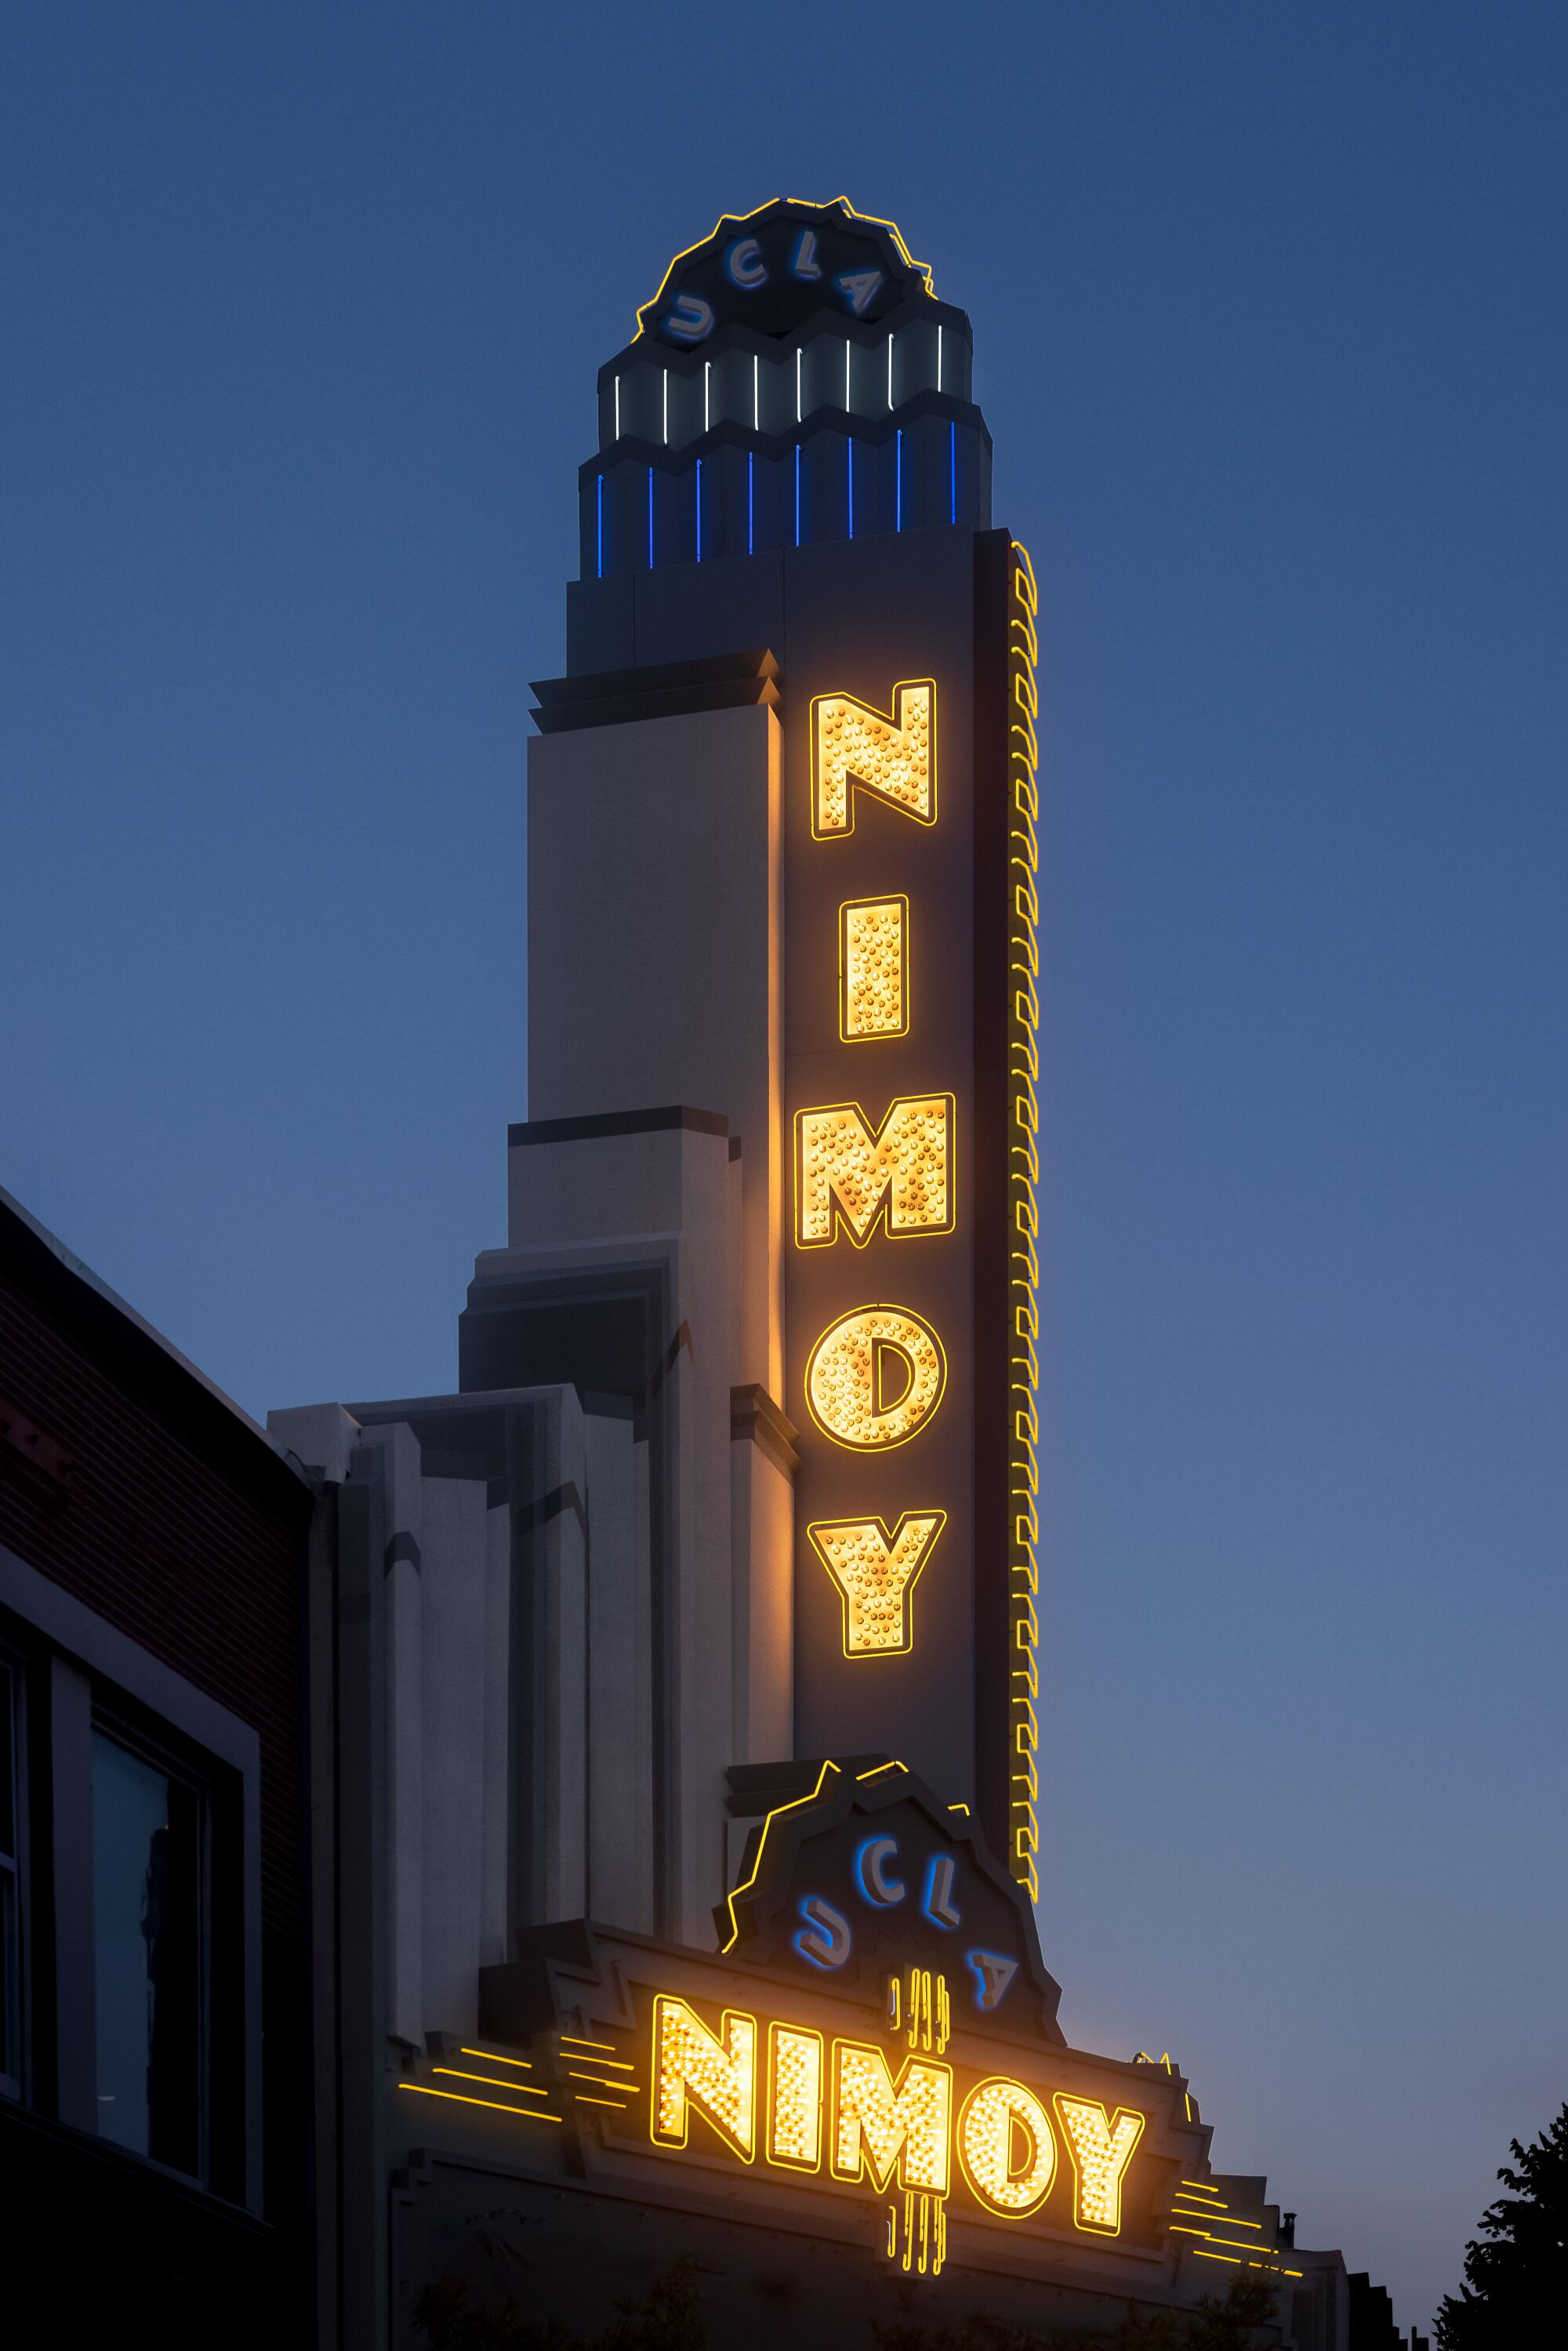 The marquee for the UCLA Nimoy Theater, lit up at dusk.